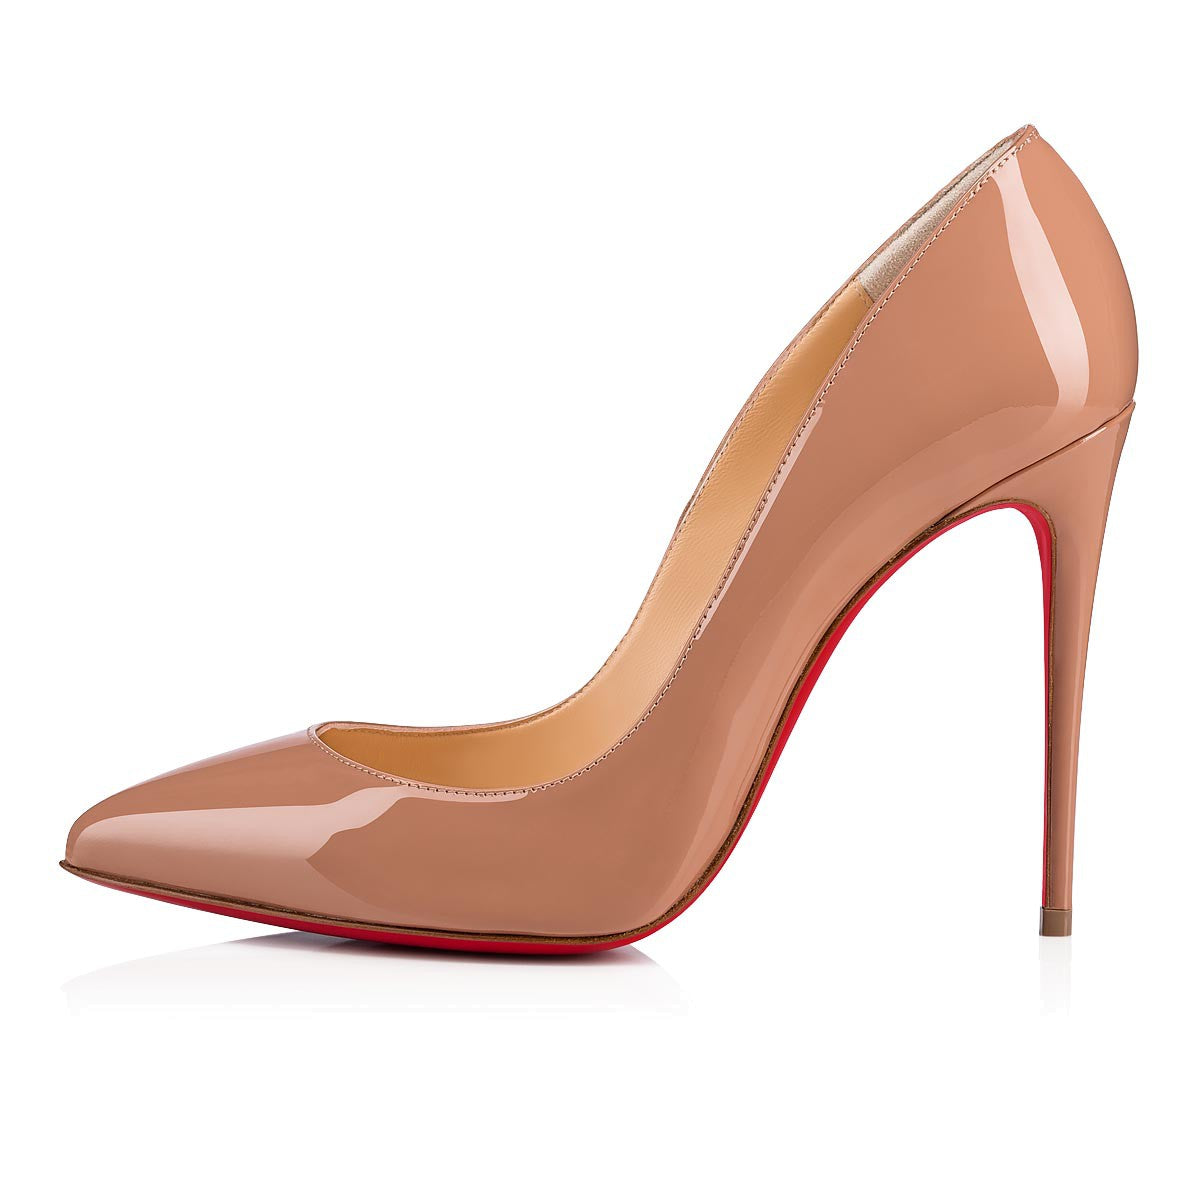 Christian Louboutin Pigalle Follies in Nude Color on Anoosheh & Banafsheh